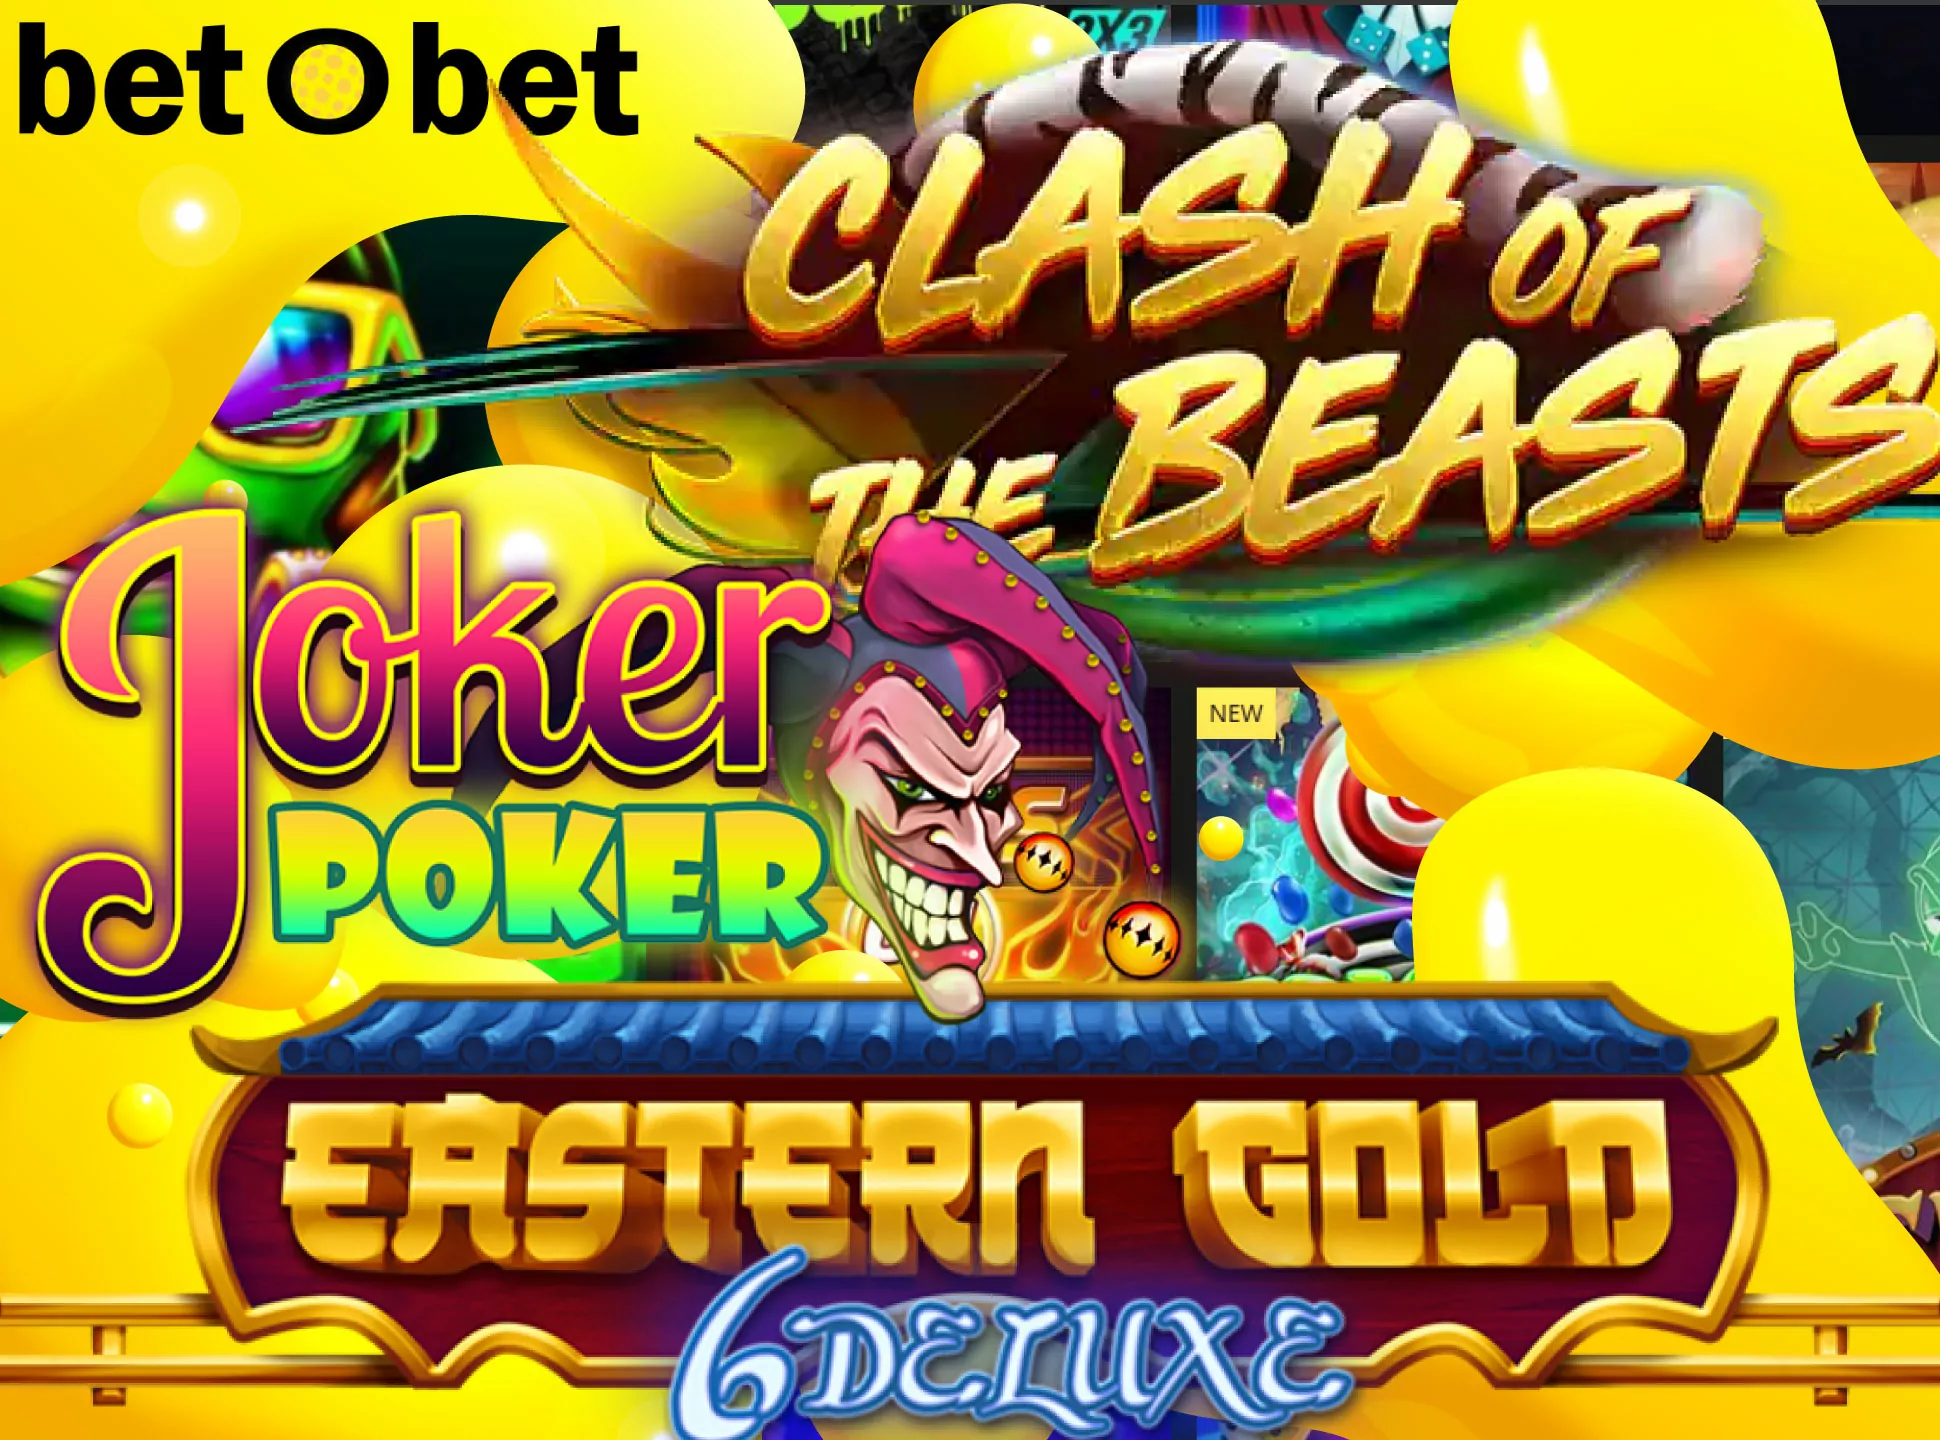 There is a wide choice of games in the Betobet online casino.